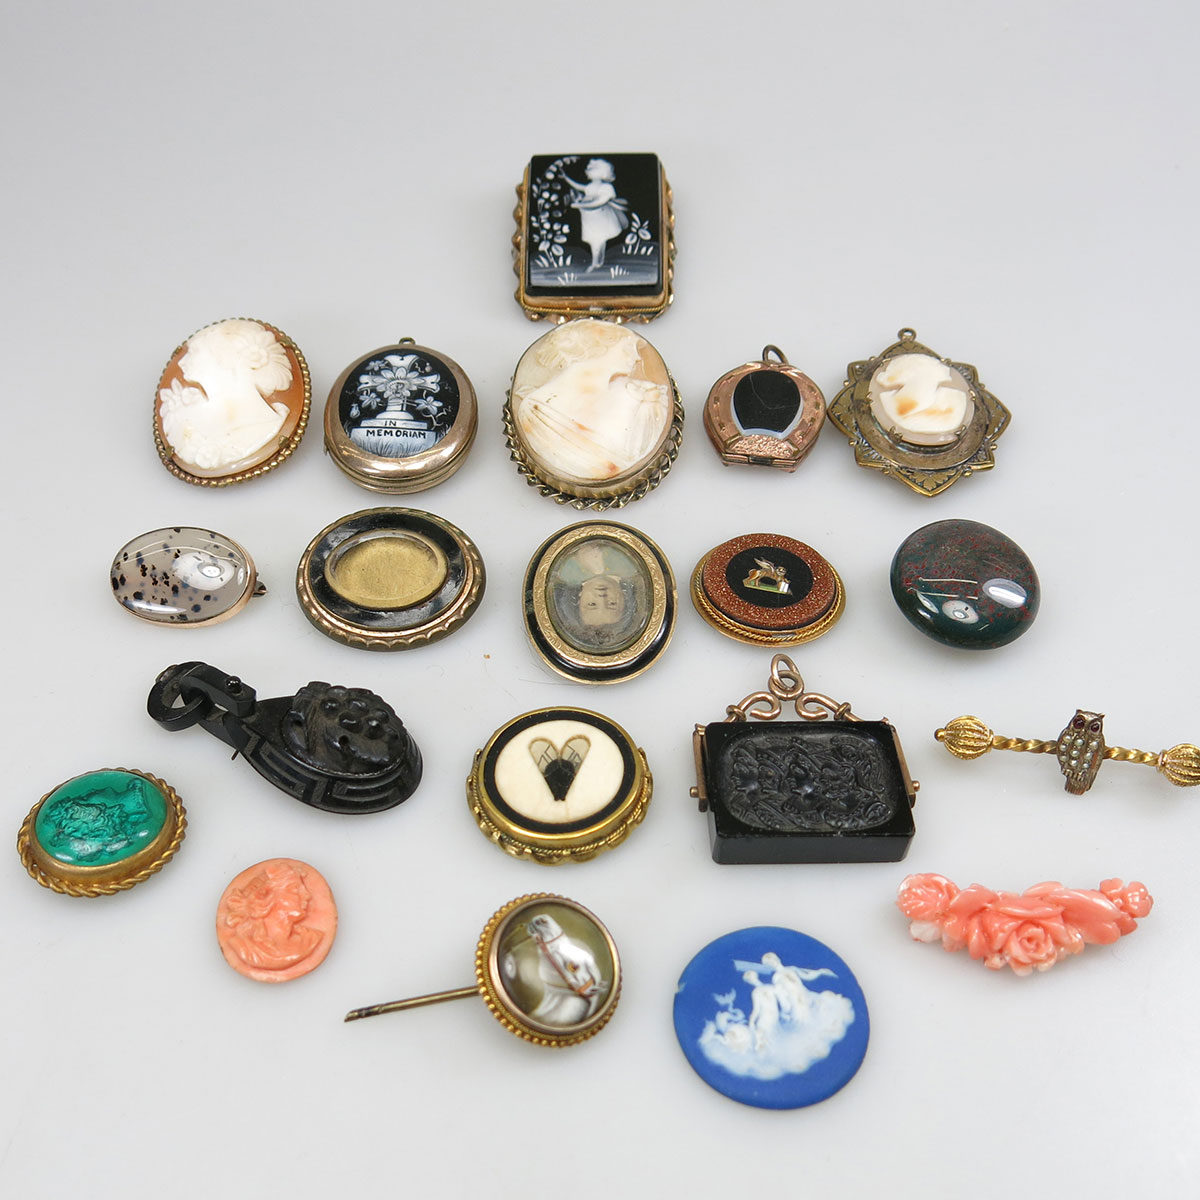 Small Quantity Of Gold-Filled Lockets, Fobs And Pins